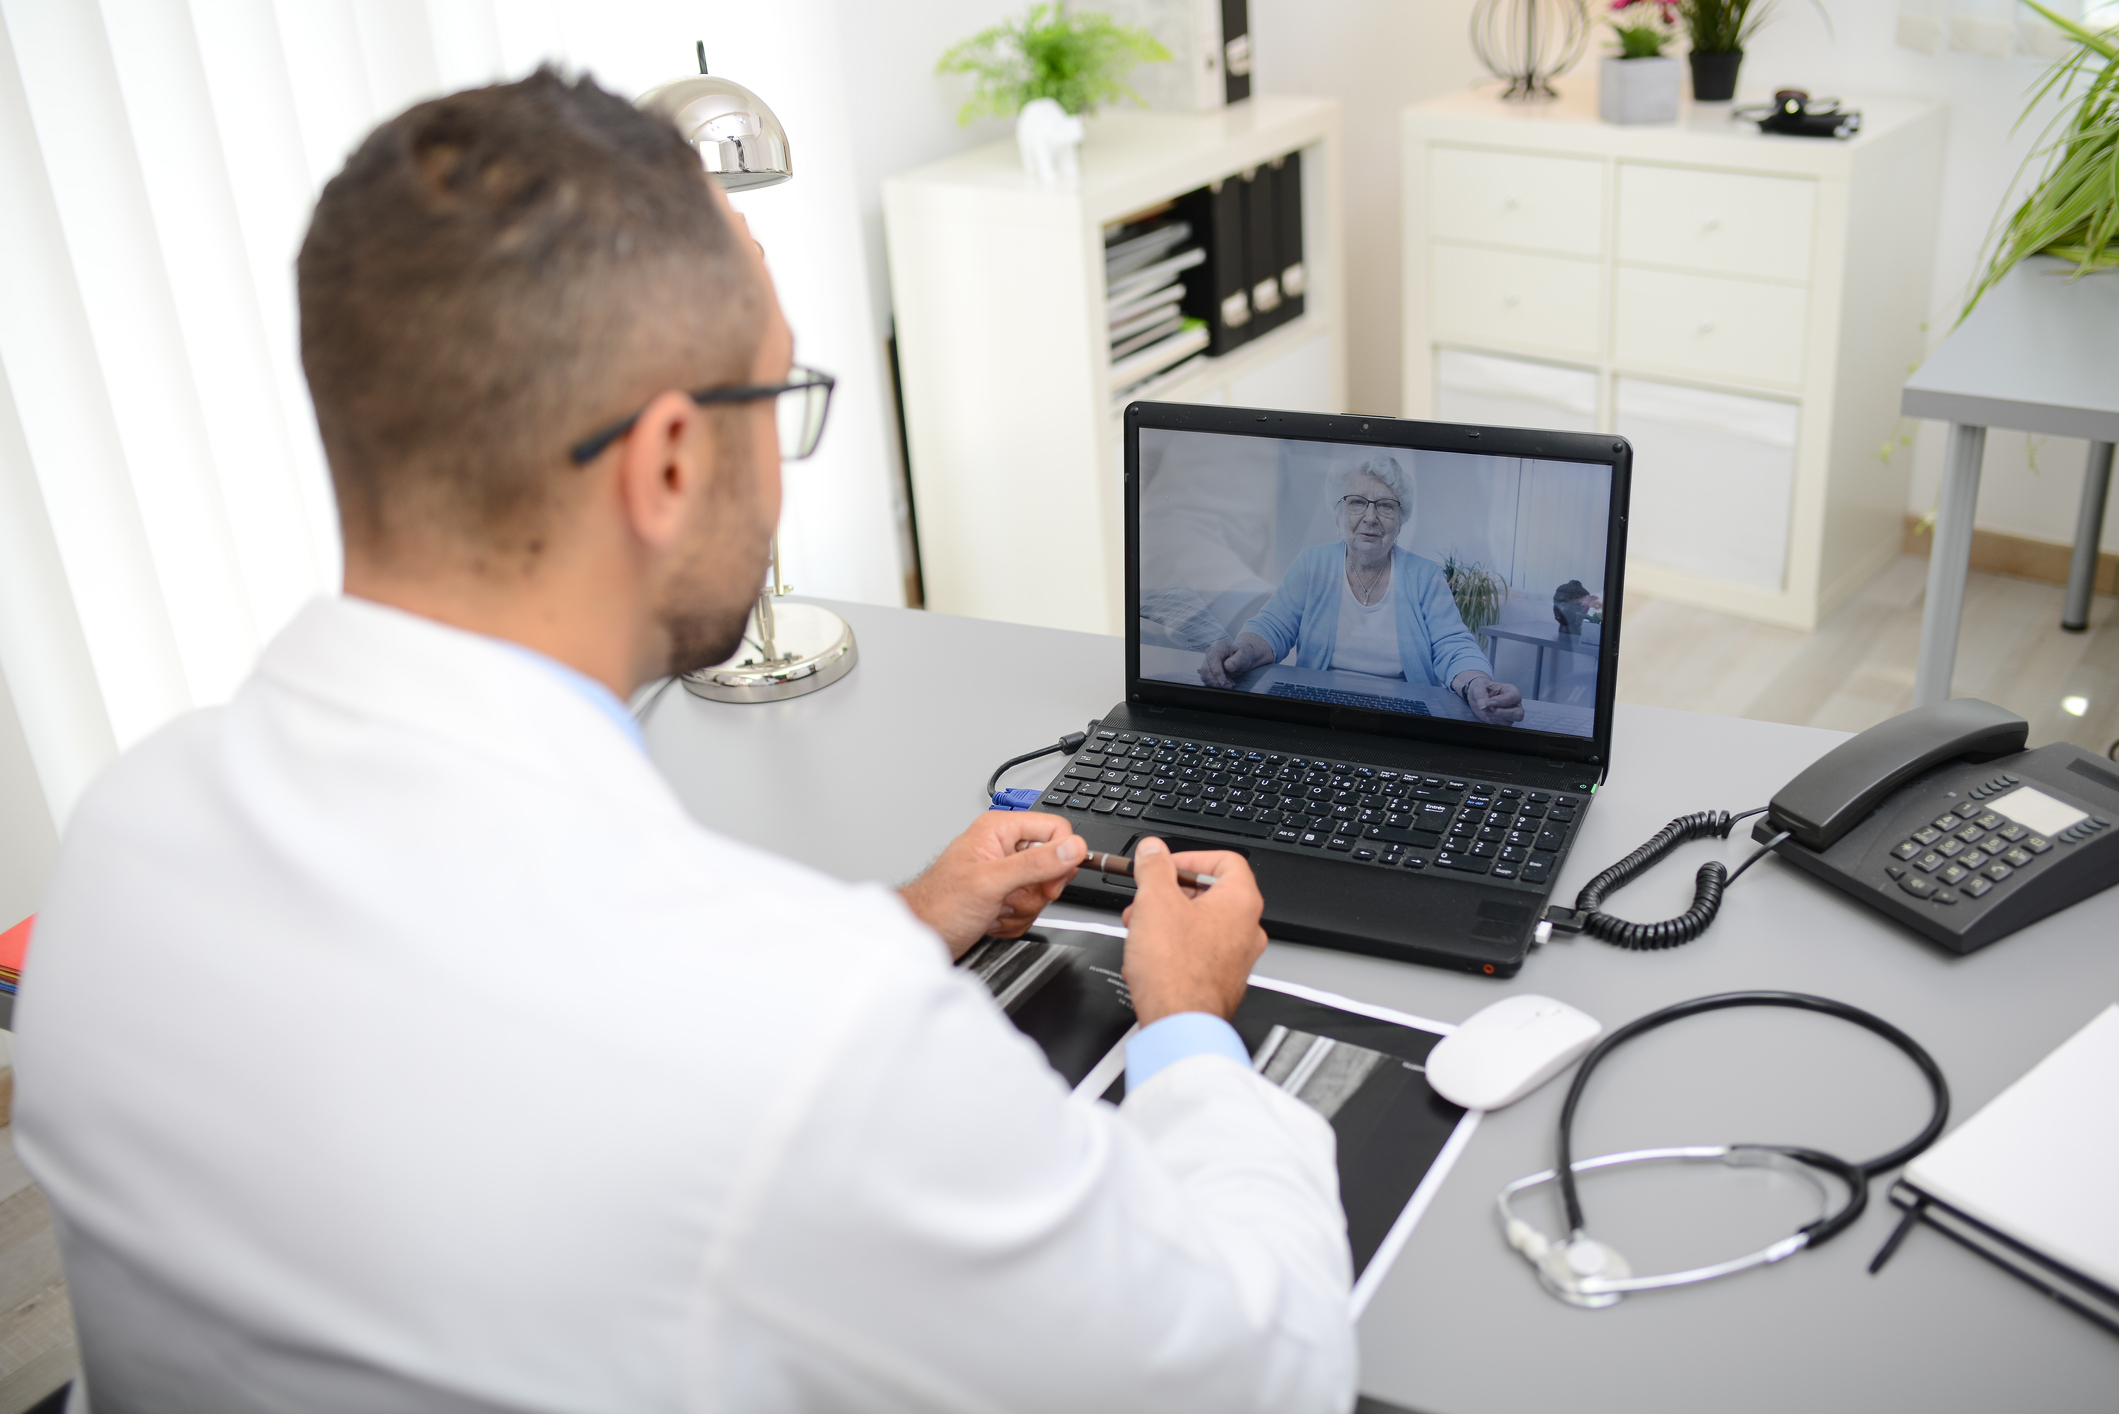 Recommendations for Designing High-Quality Telehealth